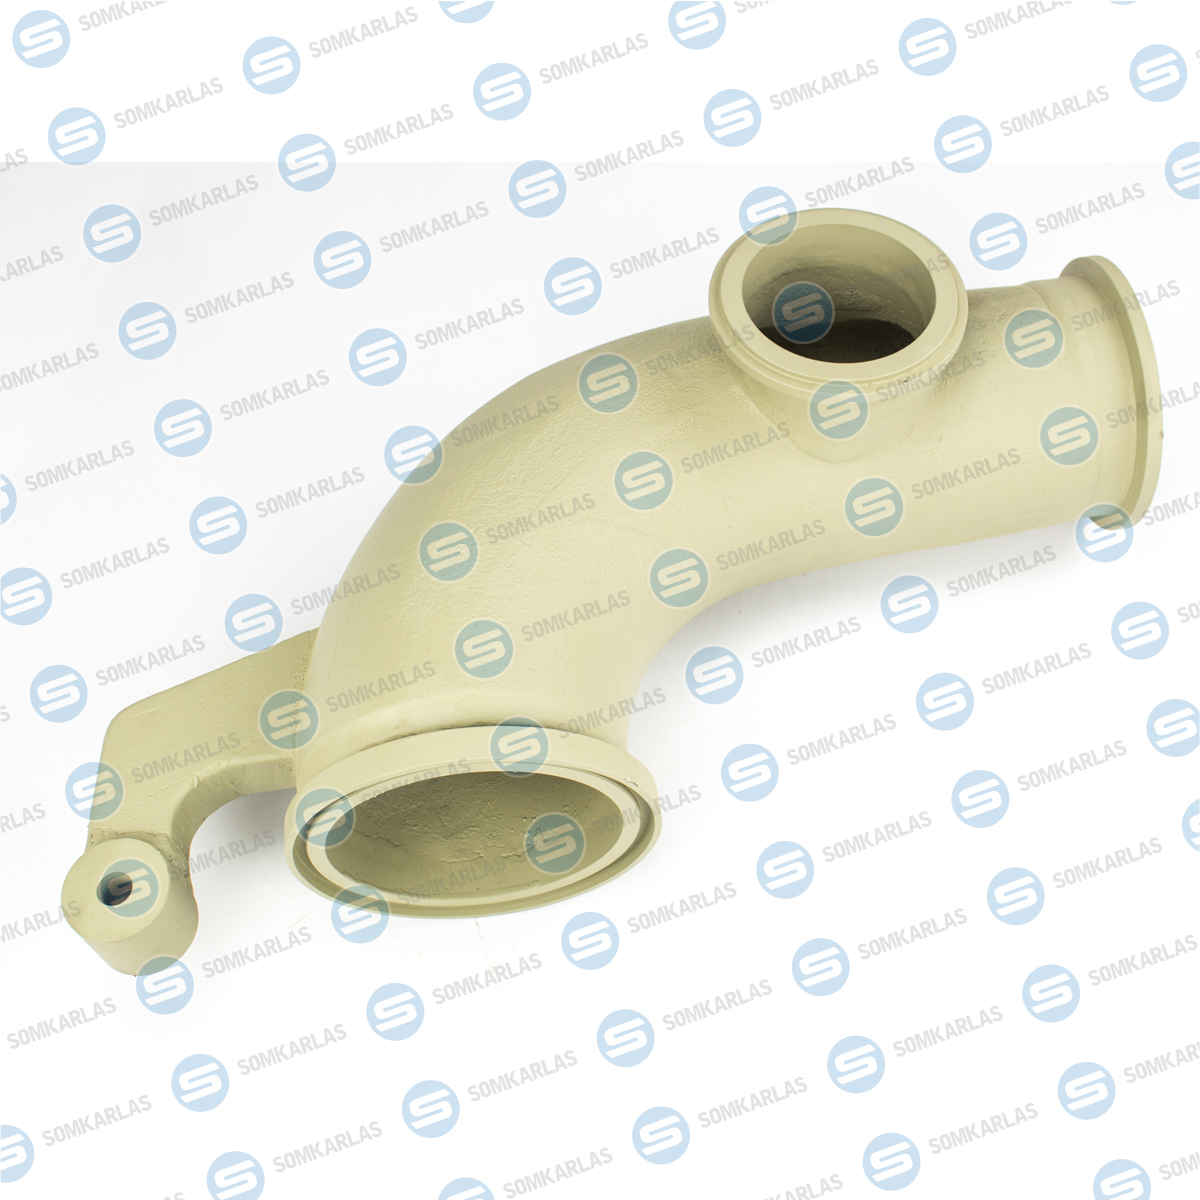 SOM40103 - 1.OUTLET ELBOW 7